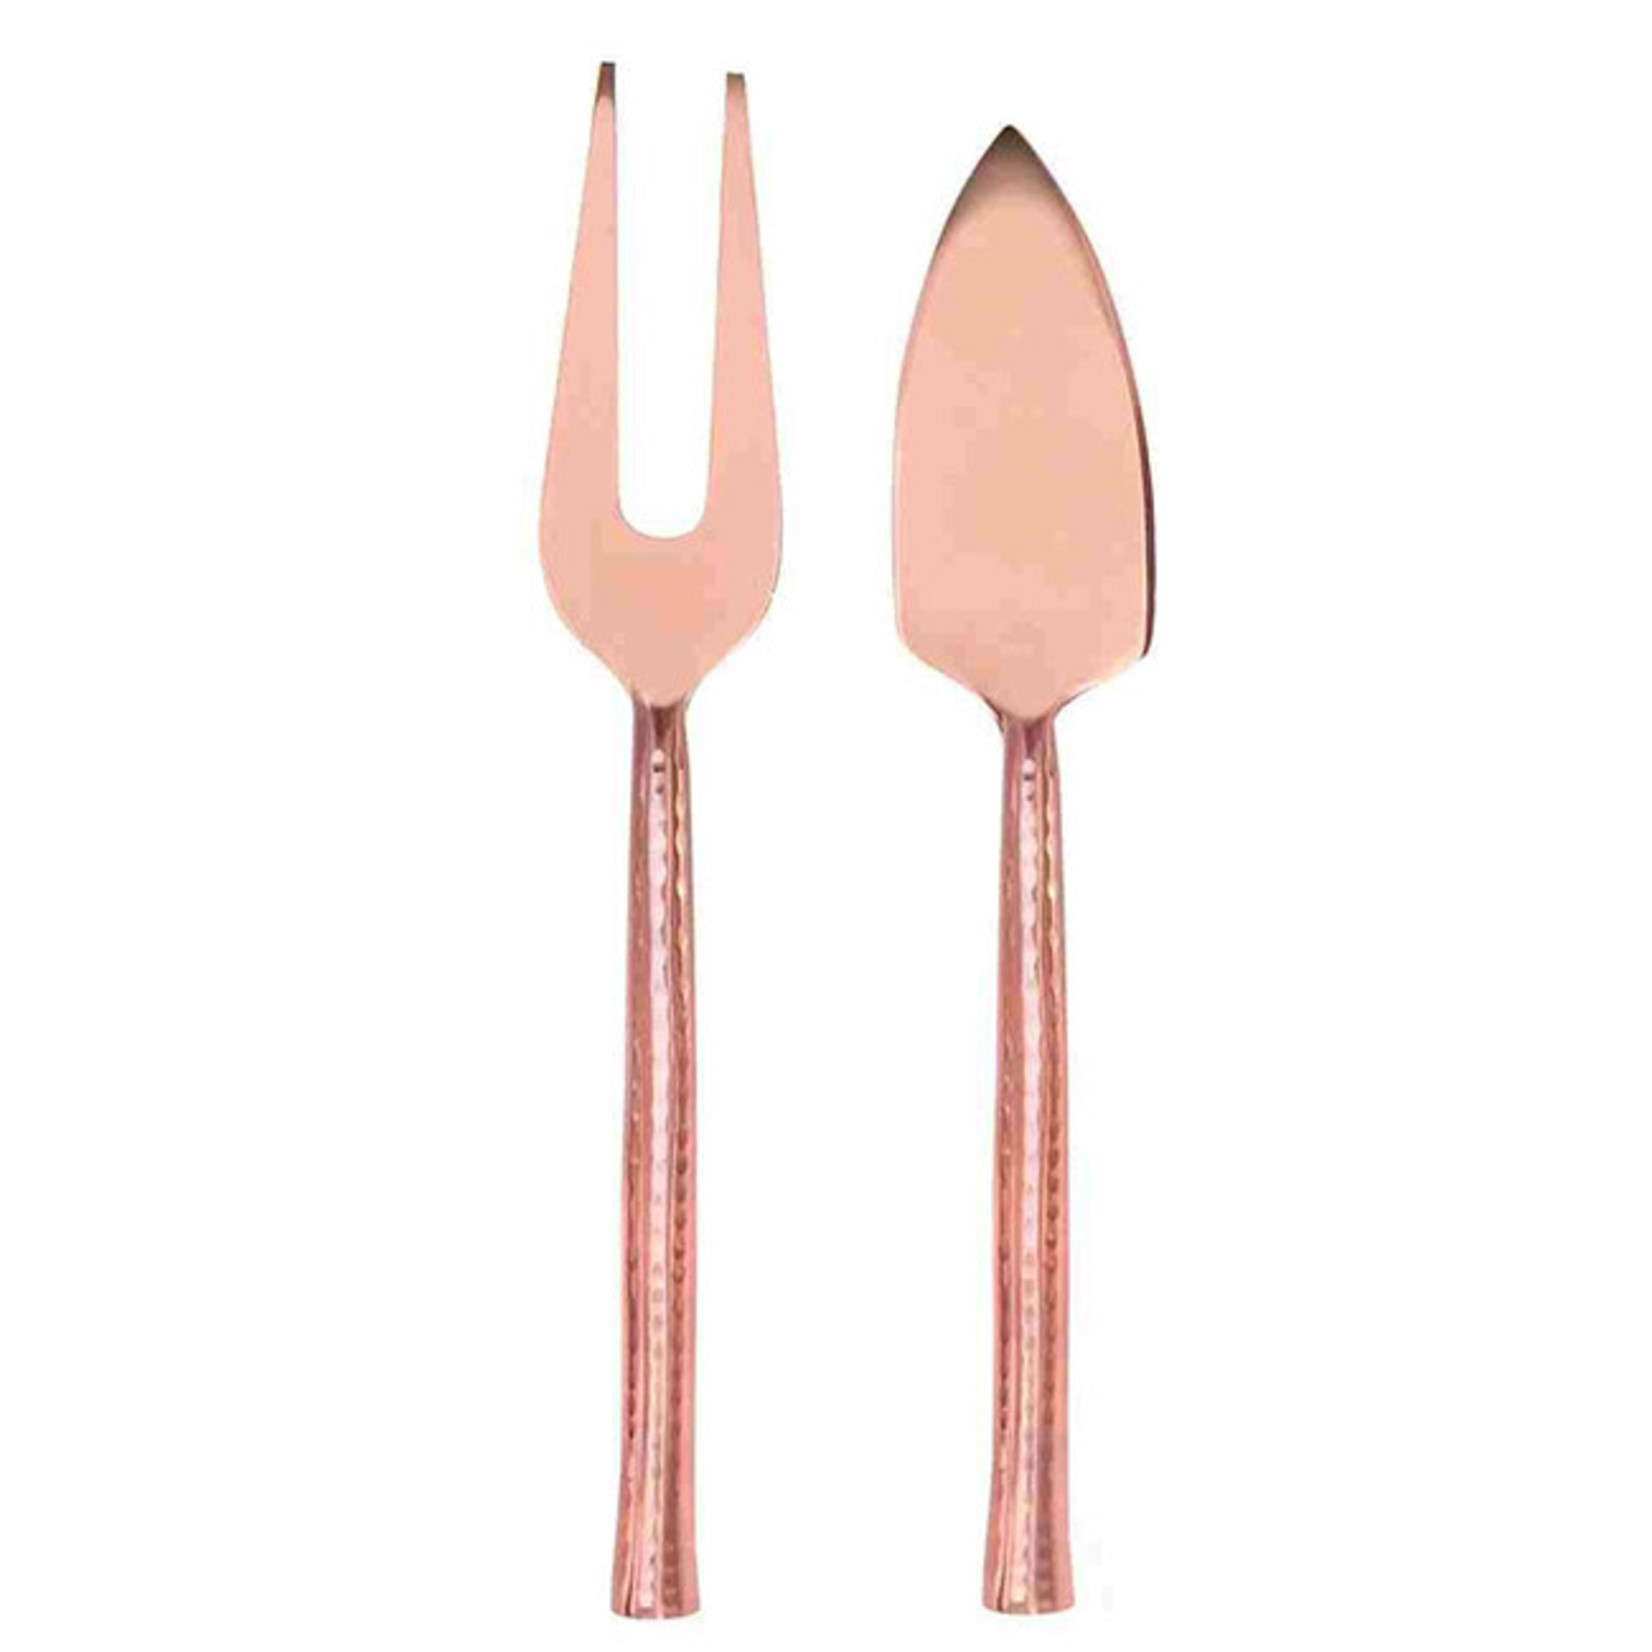 Cheese Set - Hammered 2 piece set - fork and knife